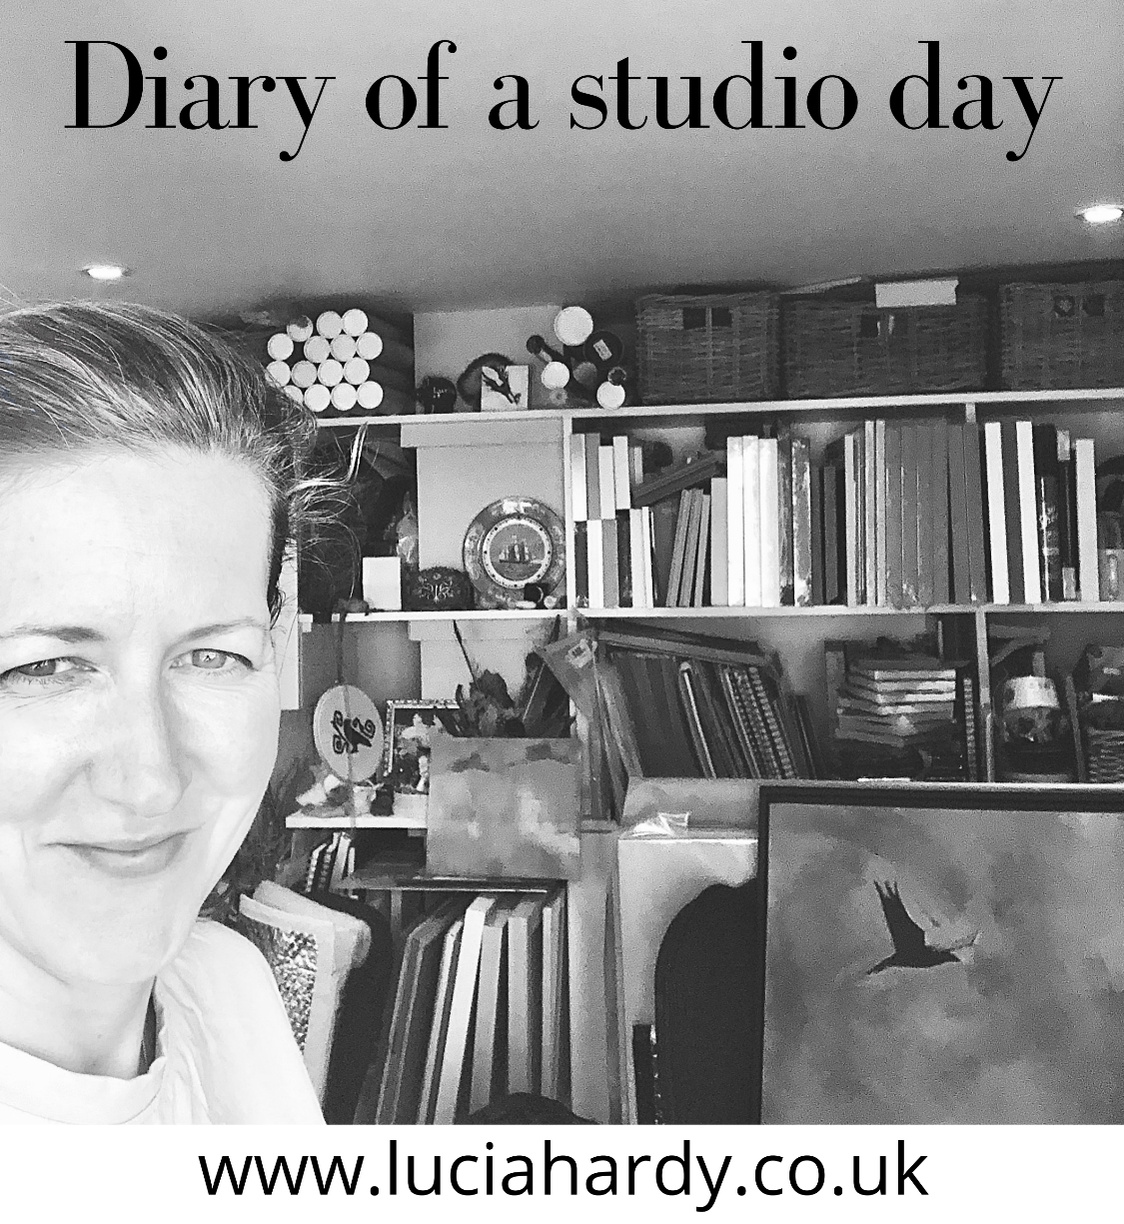 Artist Lucia Hardy standing in her studio, containing frames, canvases and a painting of a crow in the sky.